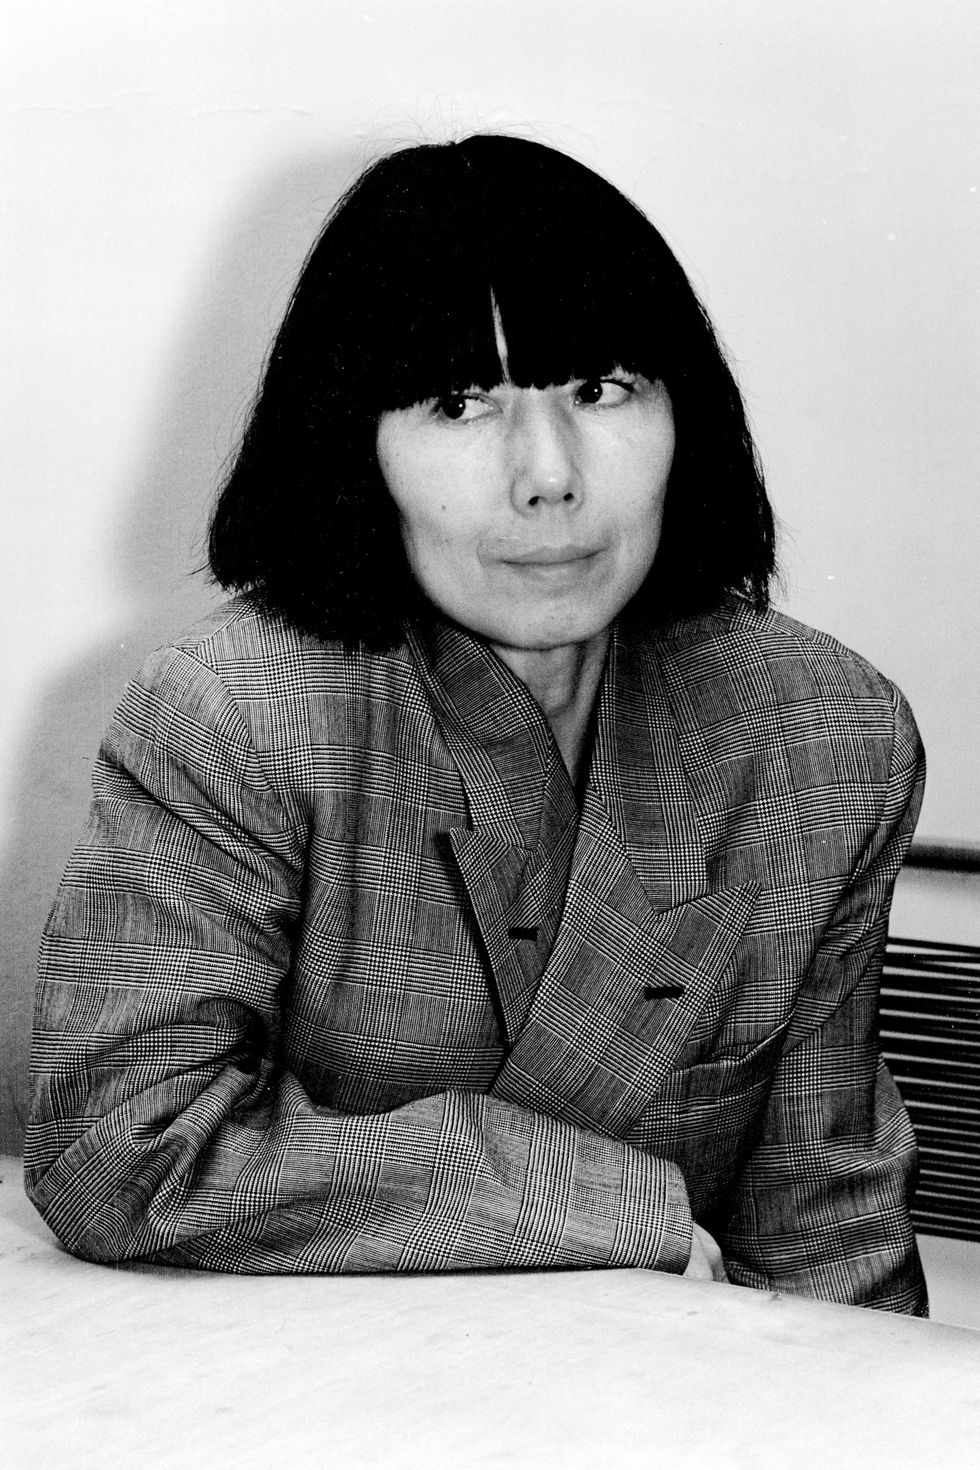 As a woman designing for other women,  Rei Kawakubo has always challenged the traditional social constructs of fashion, never compromising on art over wearability. With a background in fine arts, she launched Comme des Garçons in 1973 and showed her first collection in Paris in 1981. Her large, geometric frames and deconstructed, ripped and torn dresses in neutral color palettes have established her fiercely modern style. 